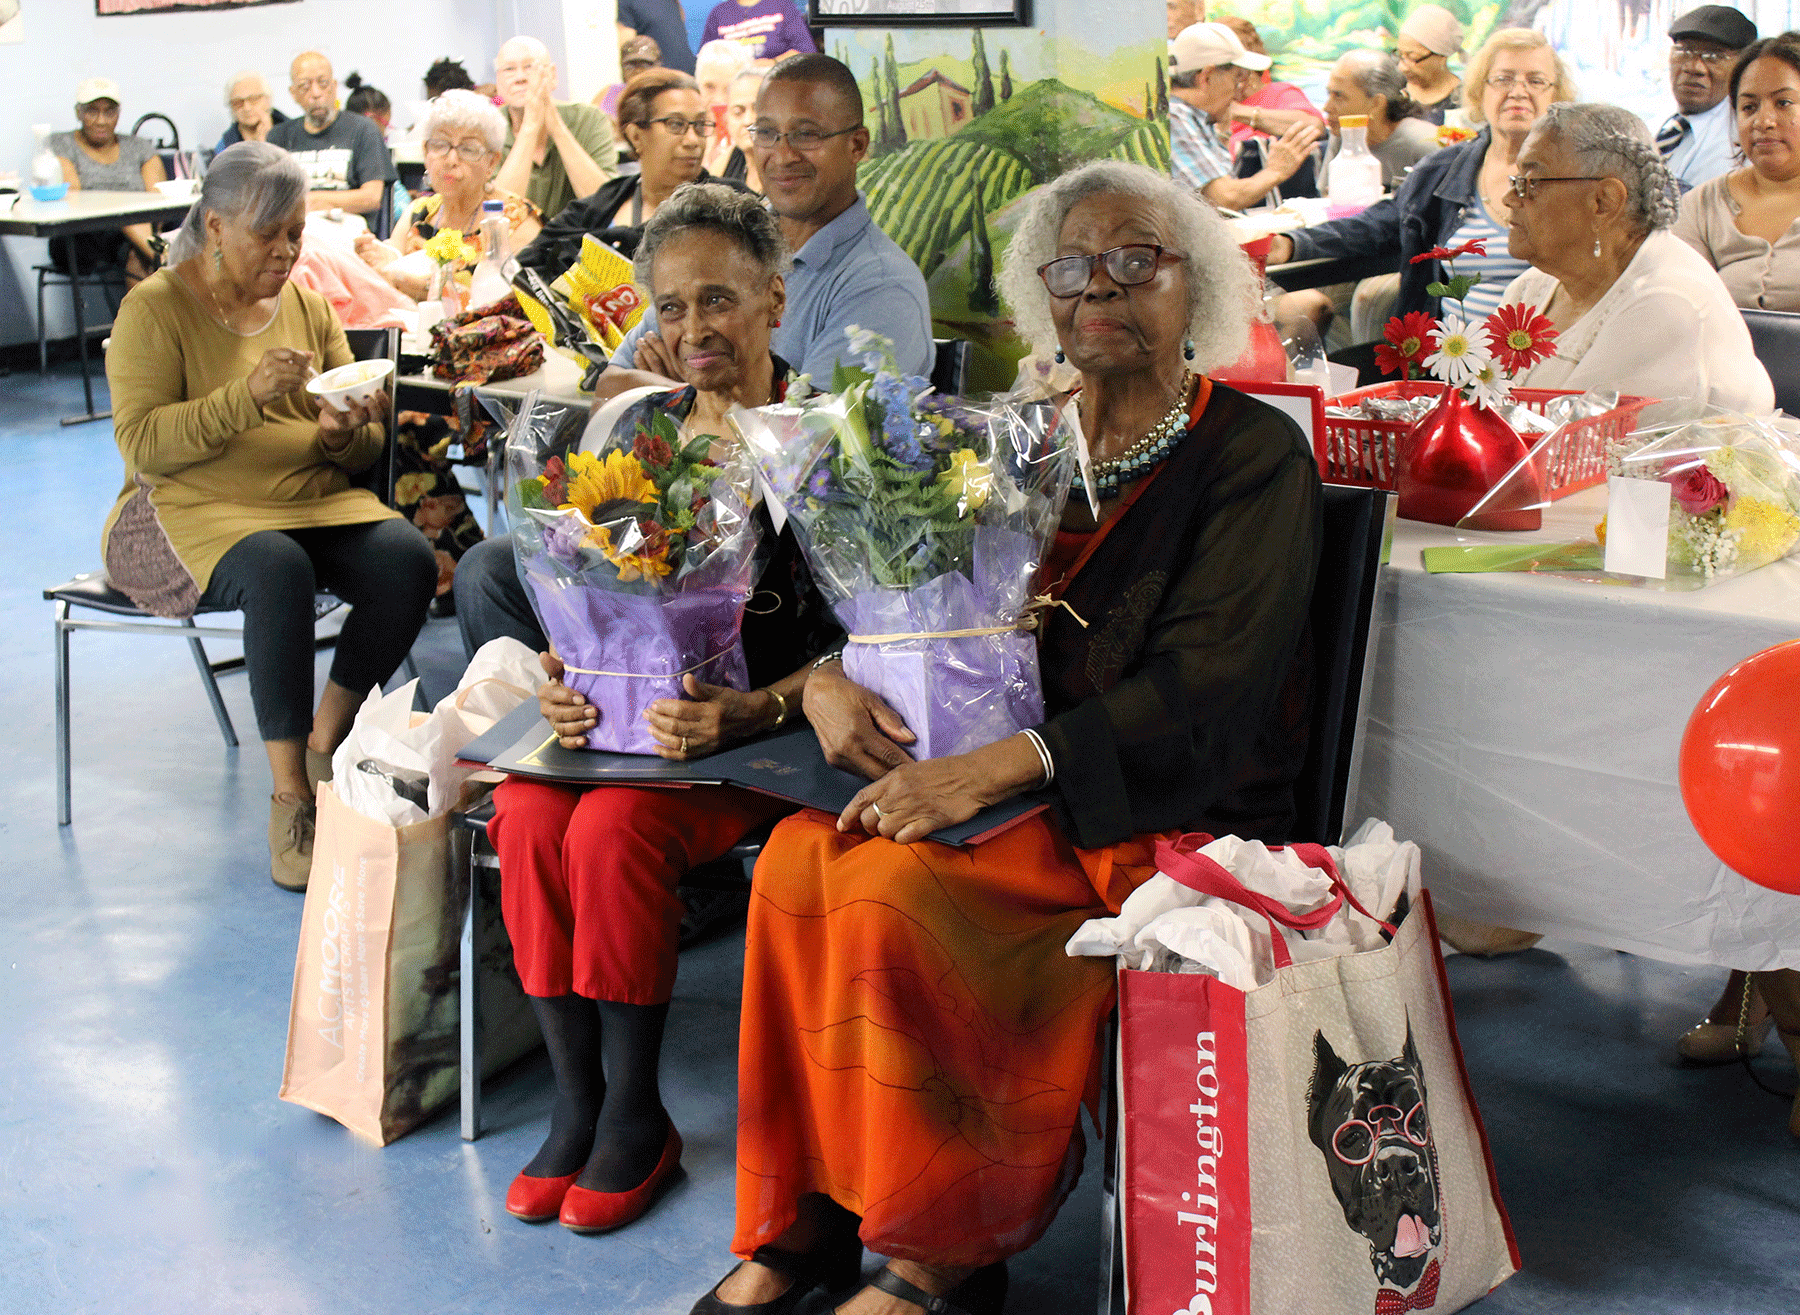 Two senior citizens being honored, sitting with flowers